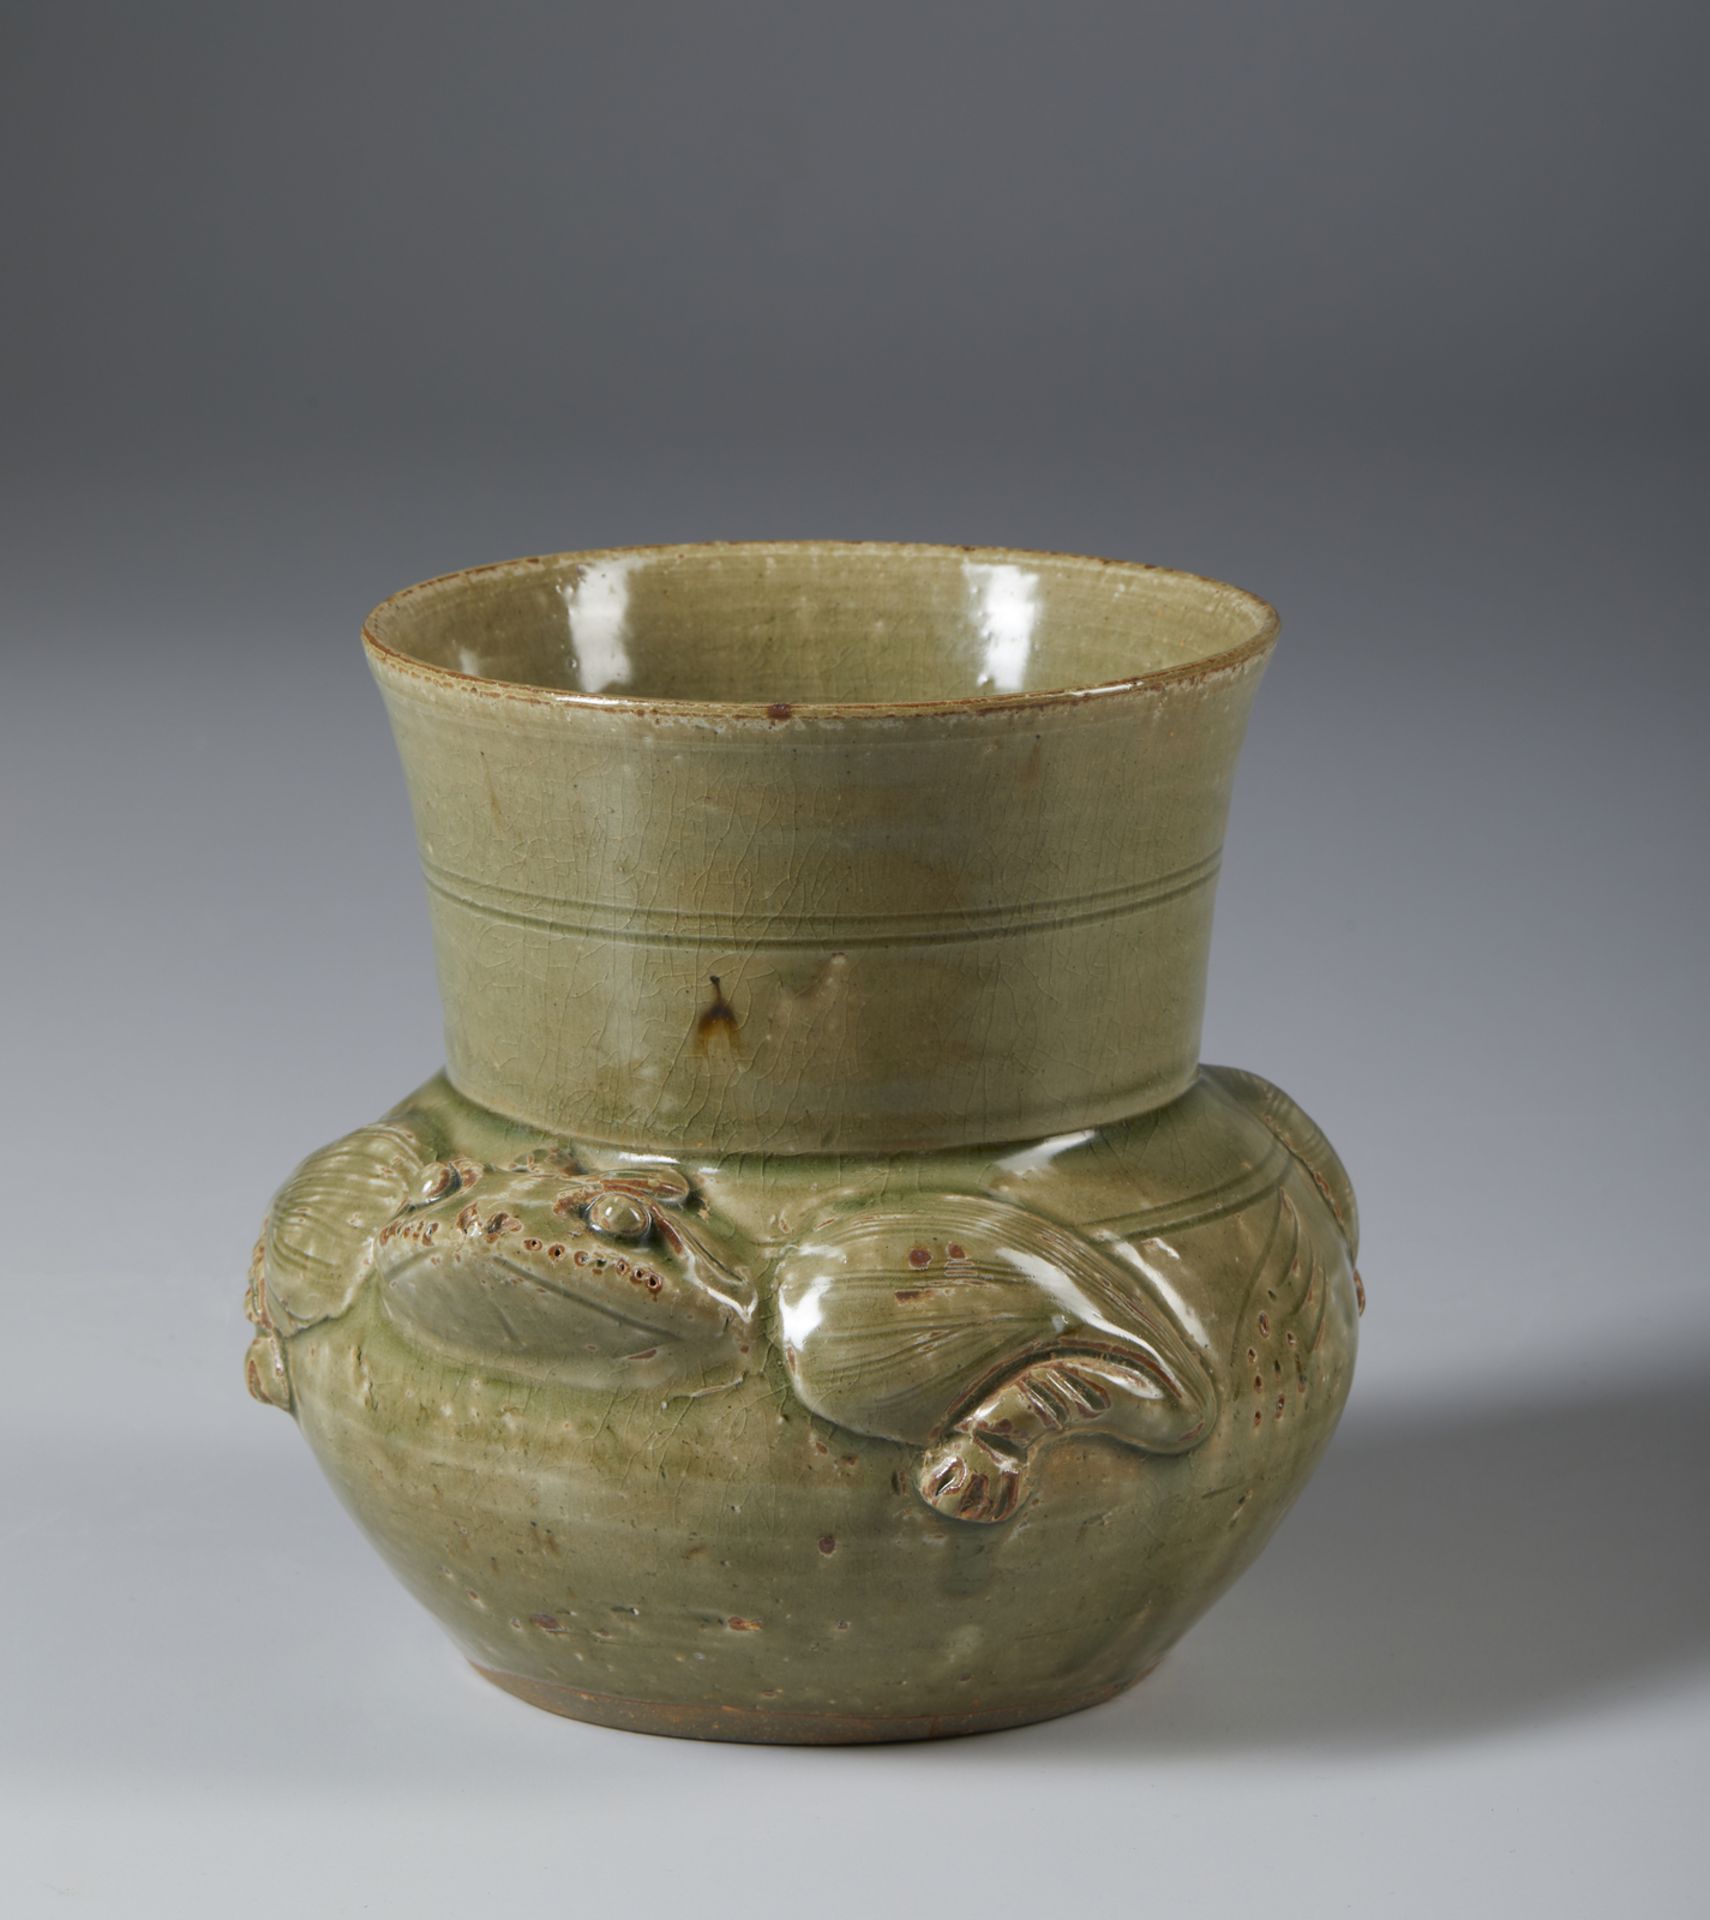 A green glazed pottery vase Vietnam, 29th century or earlier Globular body and truncated conical